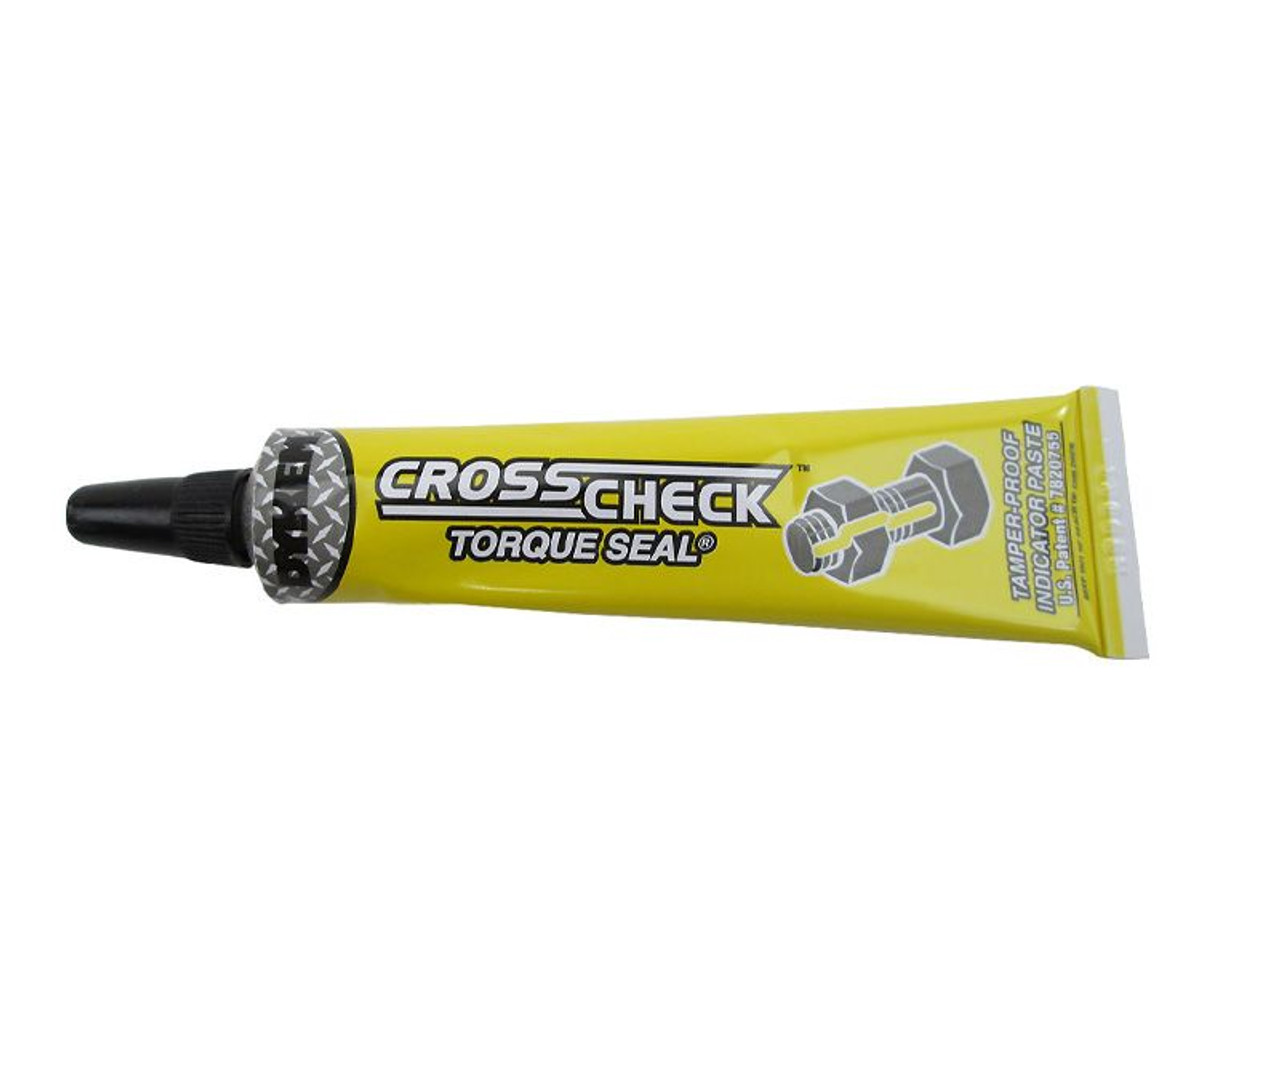 DYKEM CROSS CHECK TORQUE SEAL 3 Pack BLUE, YELLOW, WHITE Indication Paste